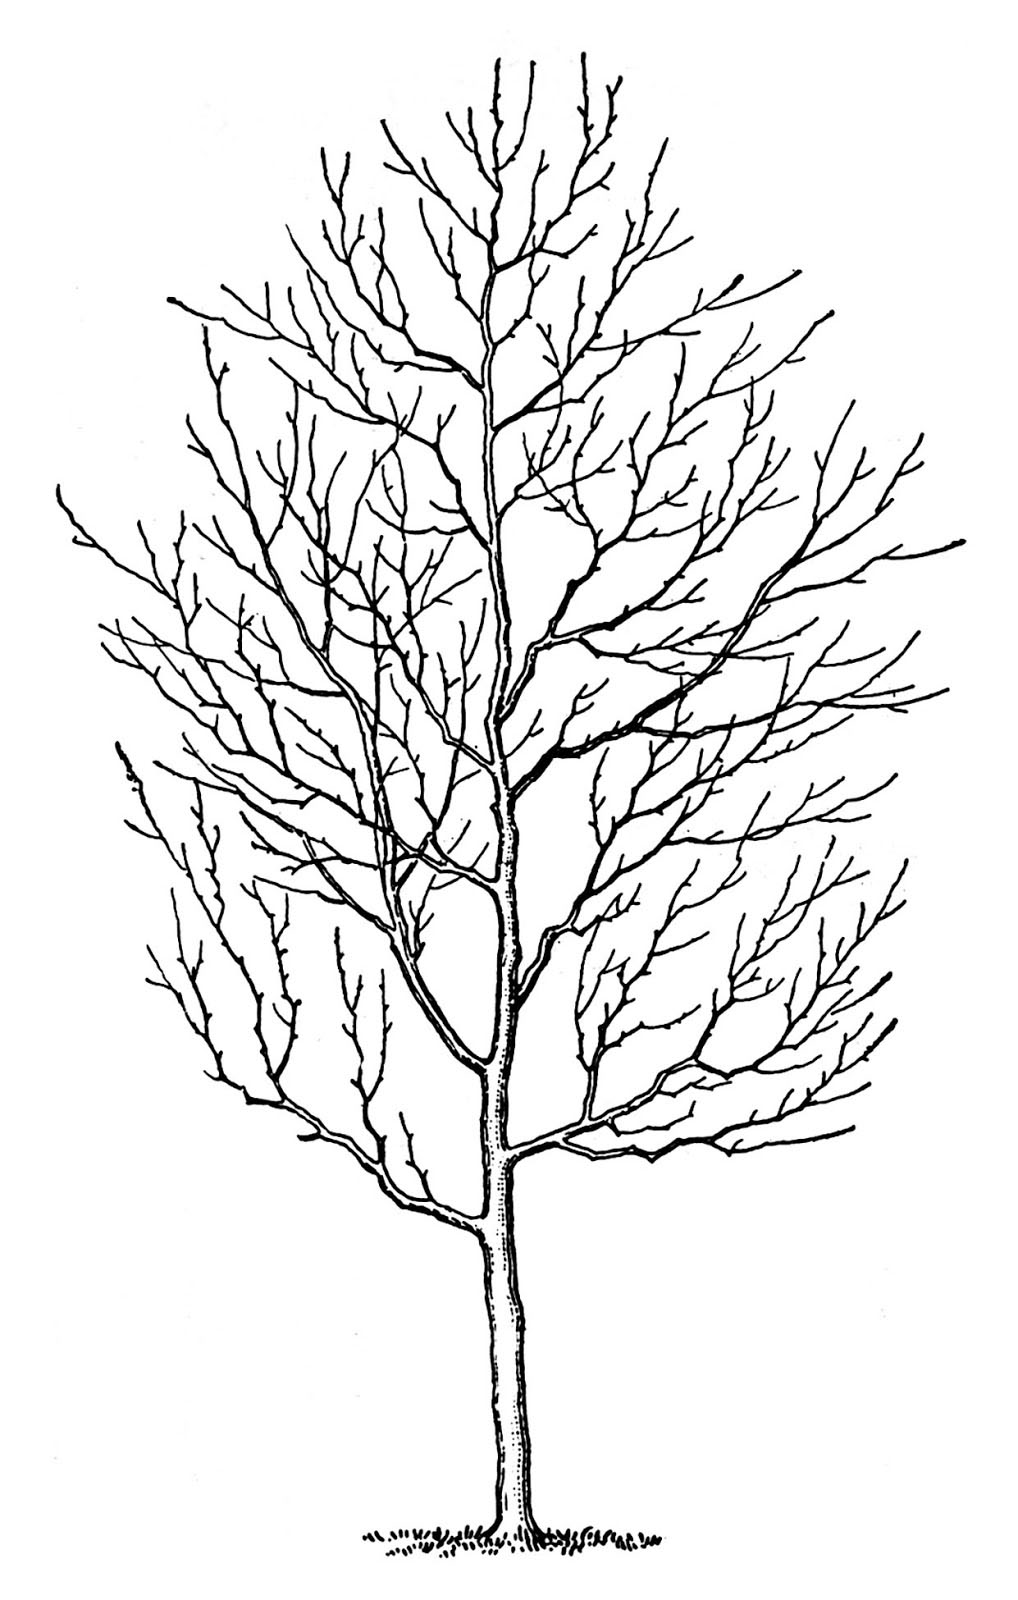 4 Winter Tree Images - Spooky! - The Graphics Fairy